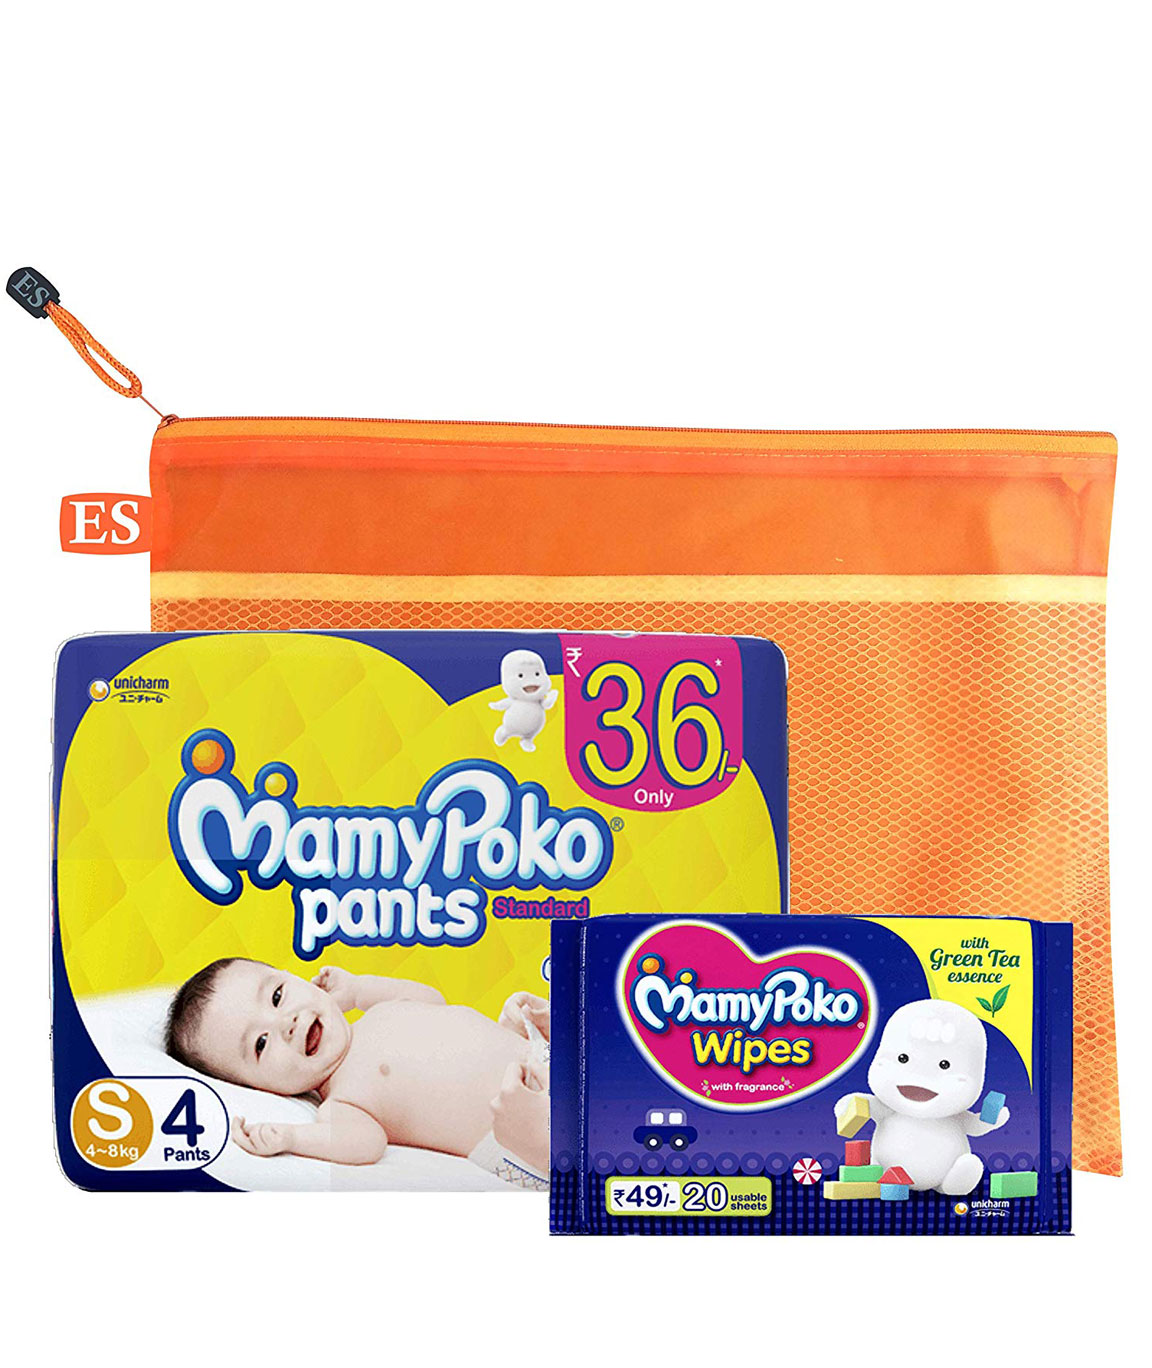 MAMY POKO PANT.. S1..240 PCS..MRP..09...6 Kg.. . . Pieces, Pack of 240 pcs)  (MRP 2,160.00 Rs) | Udaan - B2B Buying for Retailers